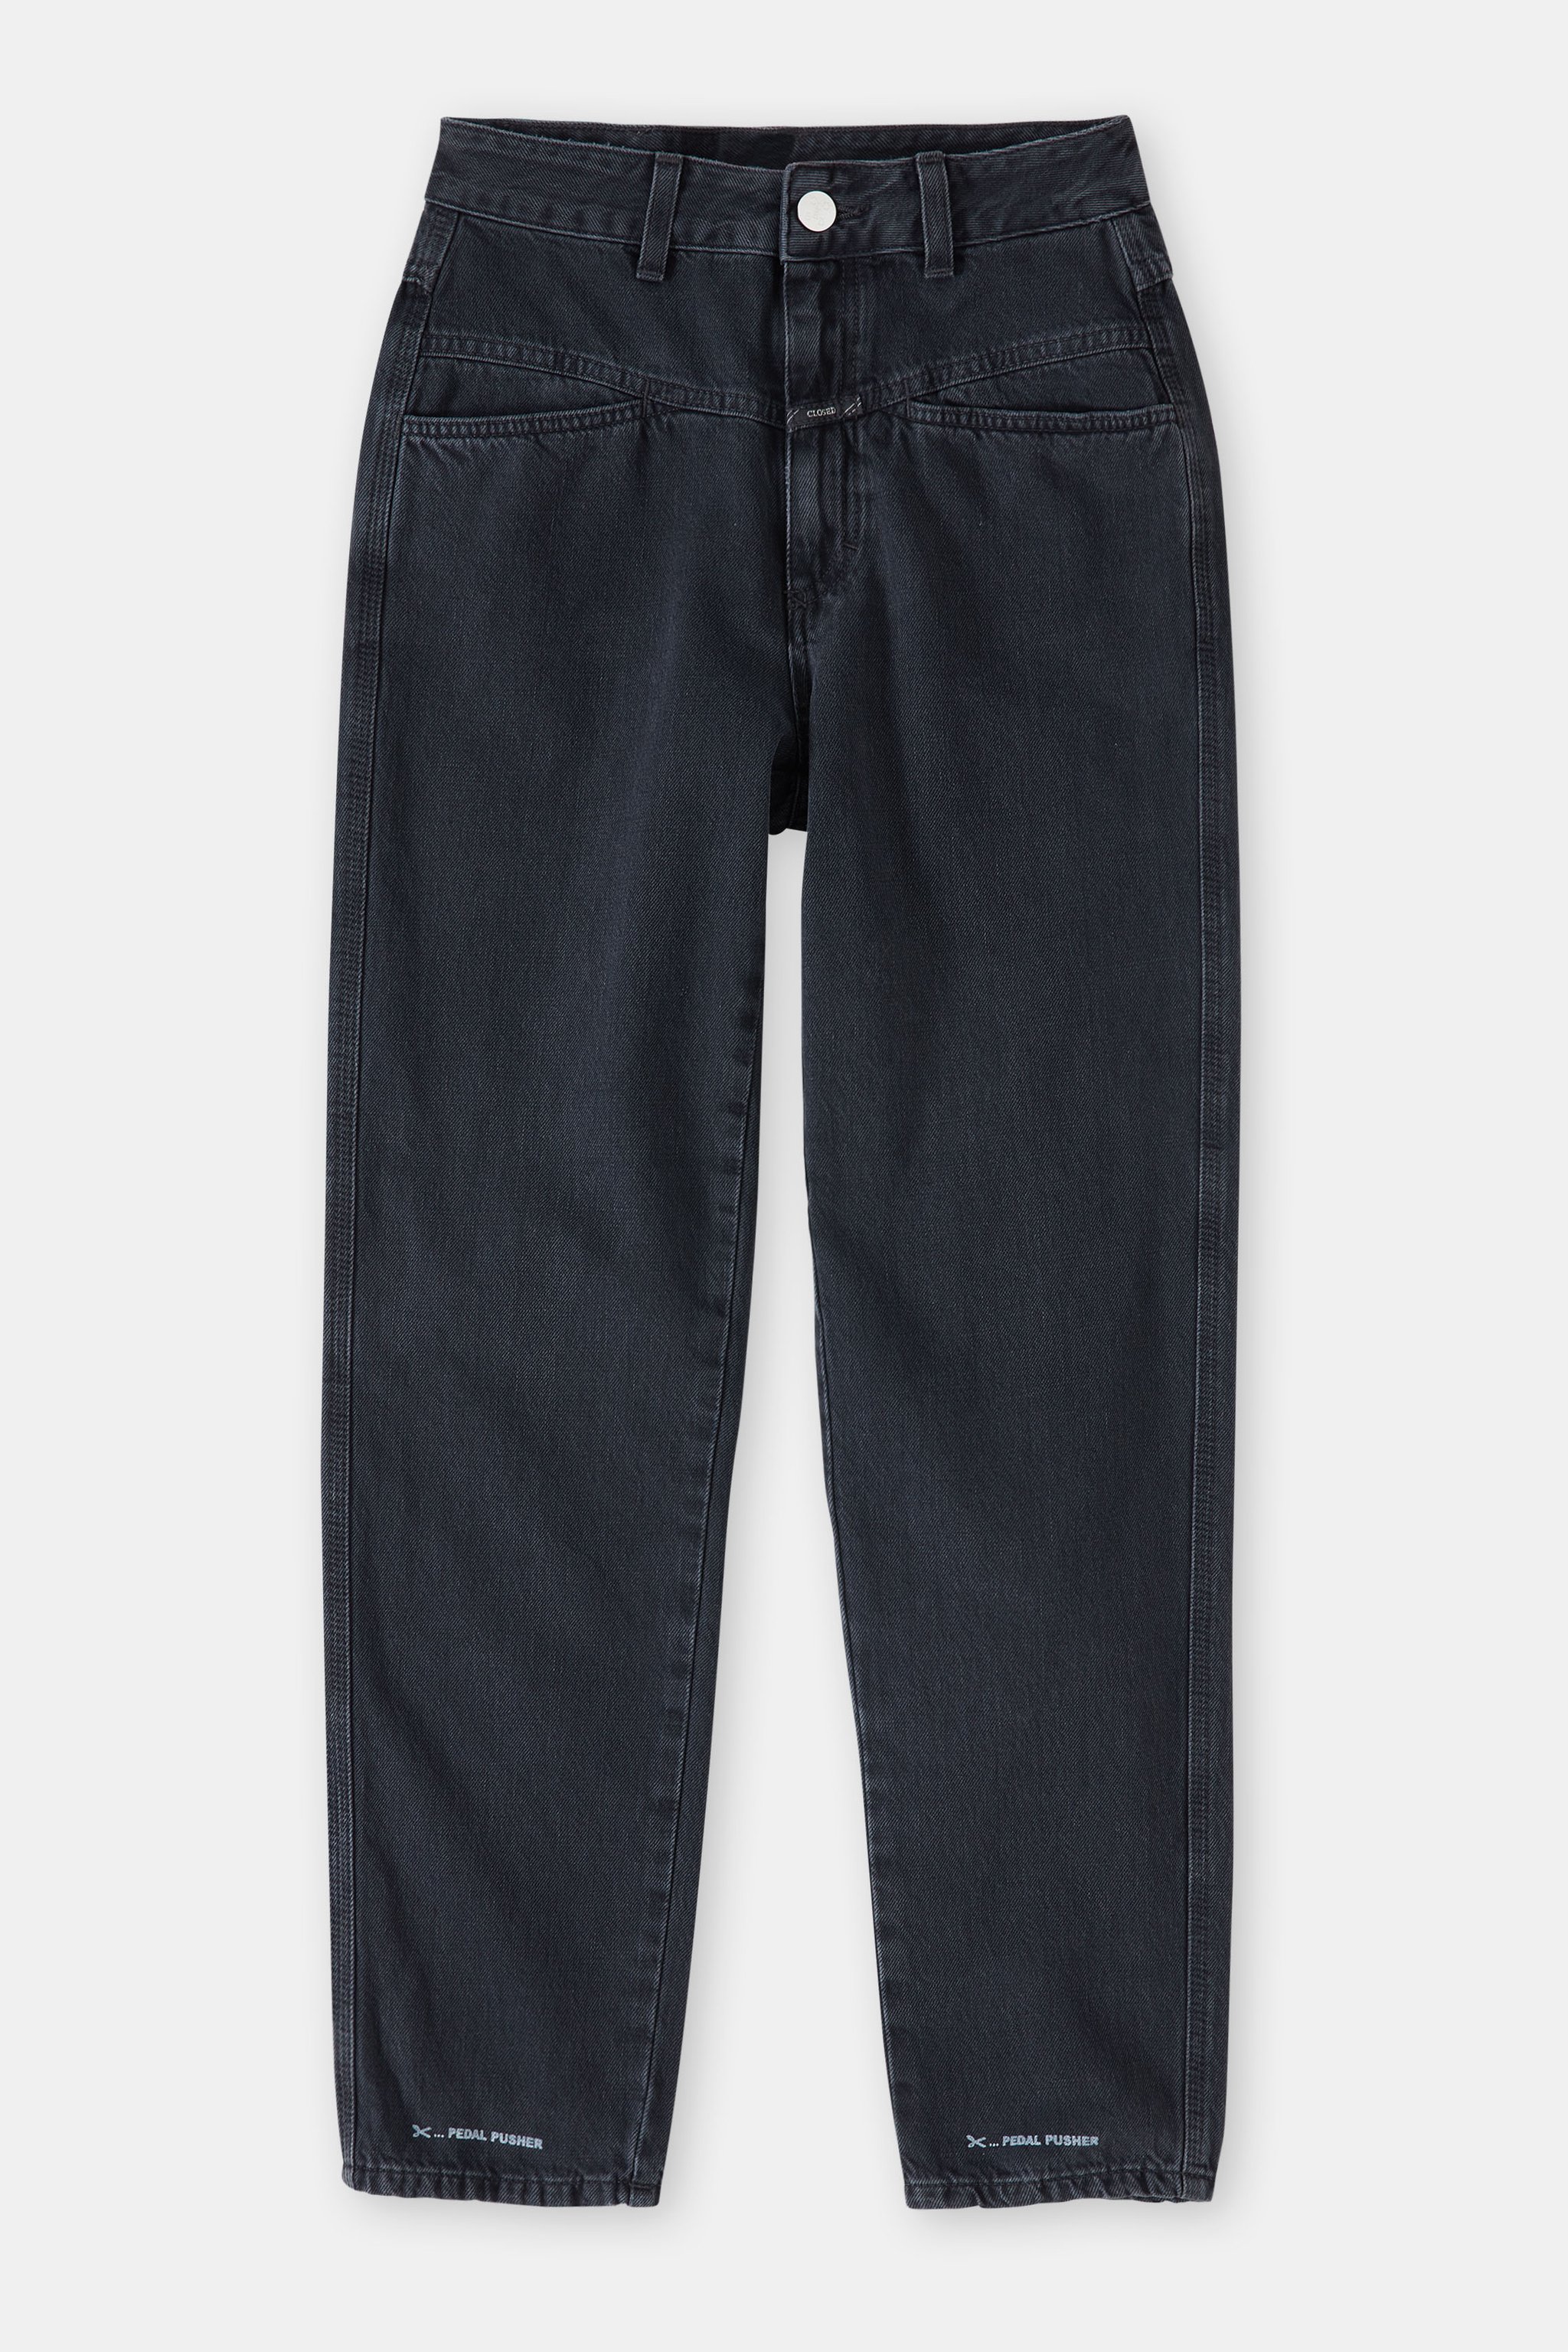 HERITAGE JEANS - STYLE NAME PEDAL PUSHER | CLOSED